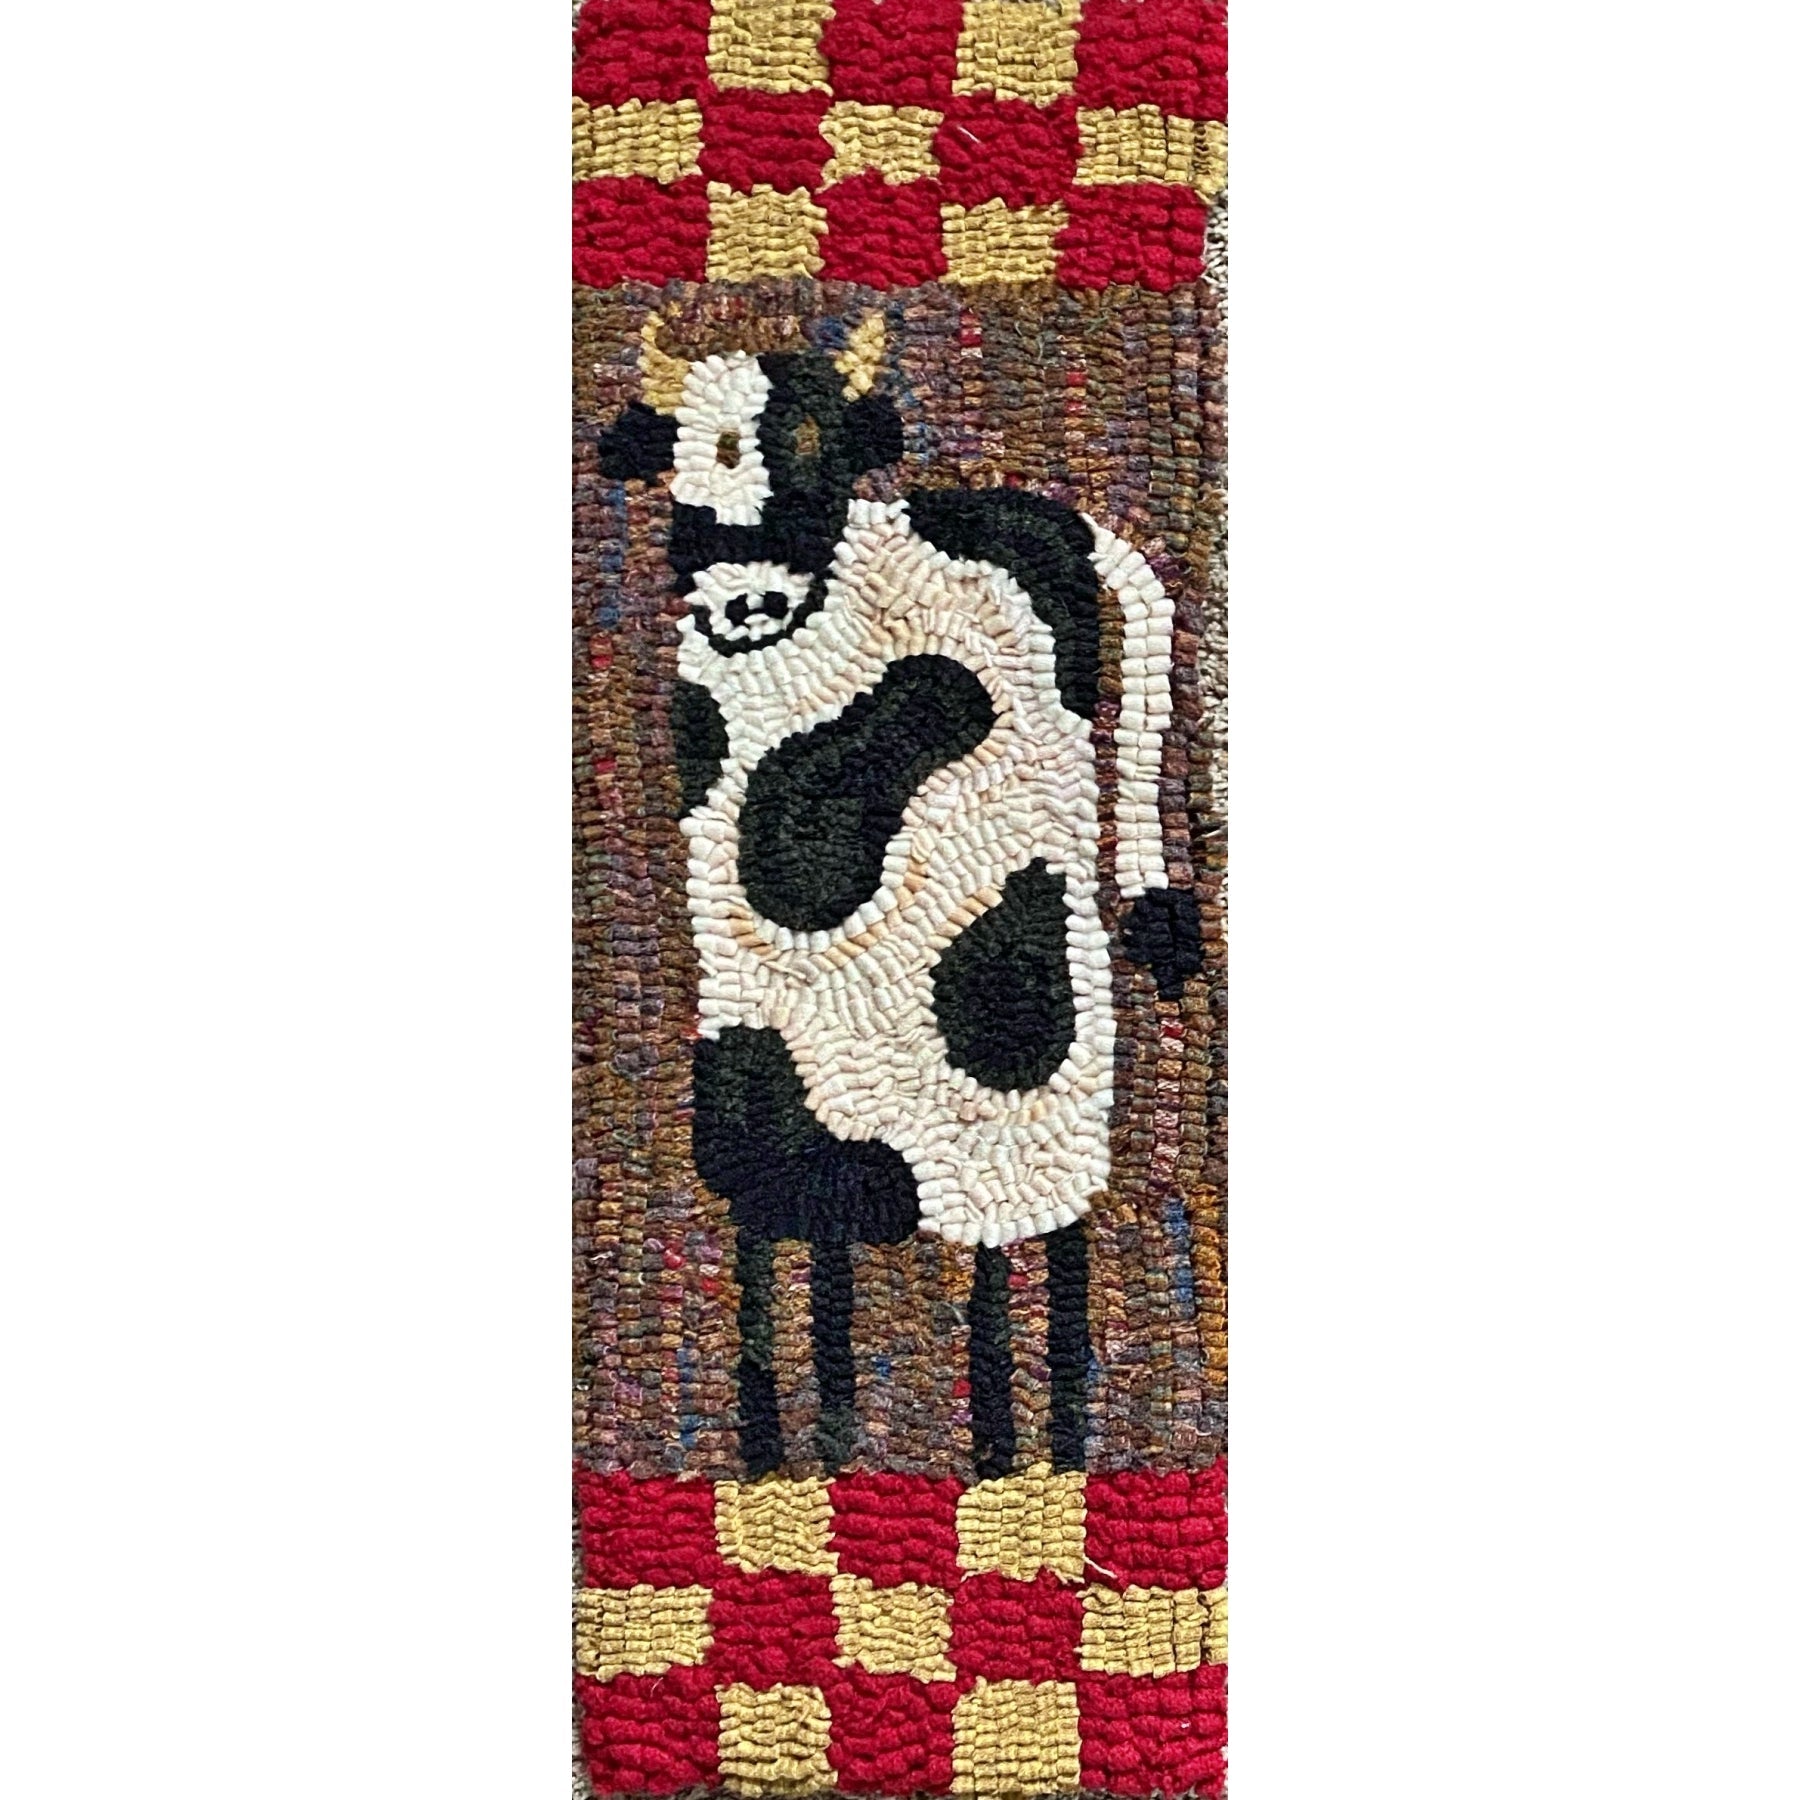 Moo, rug hooked by Laura Rose